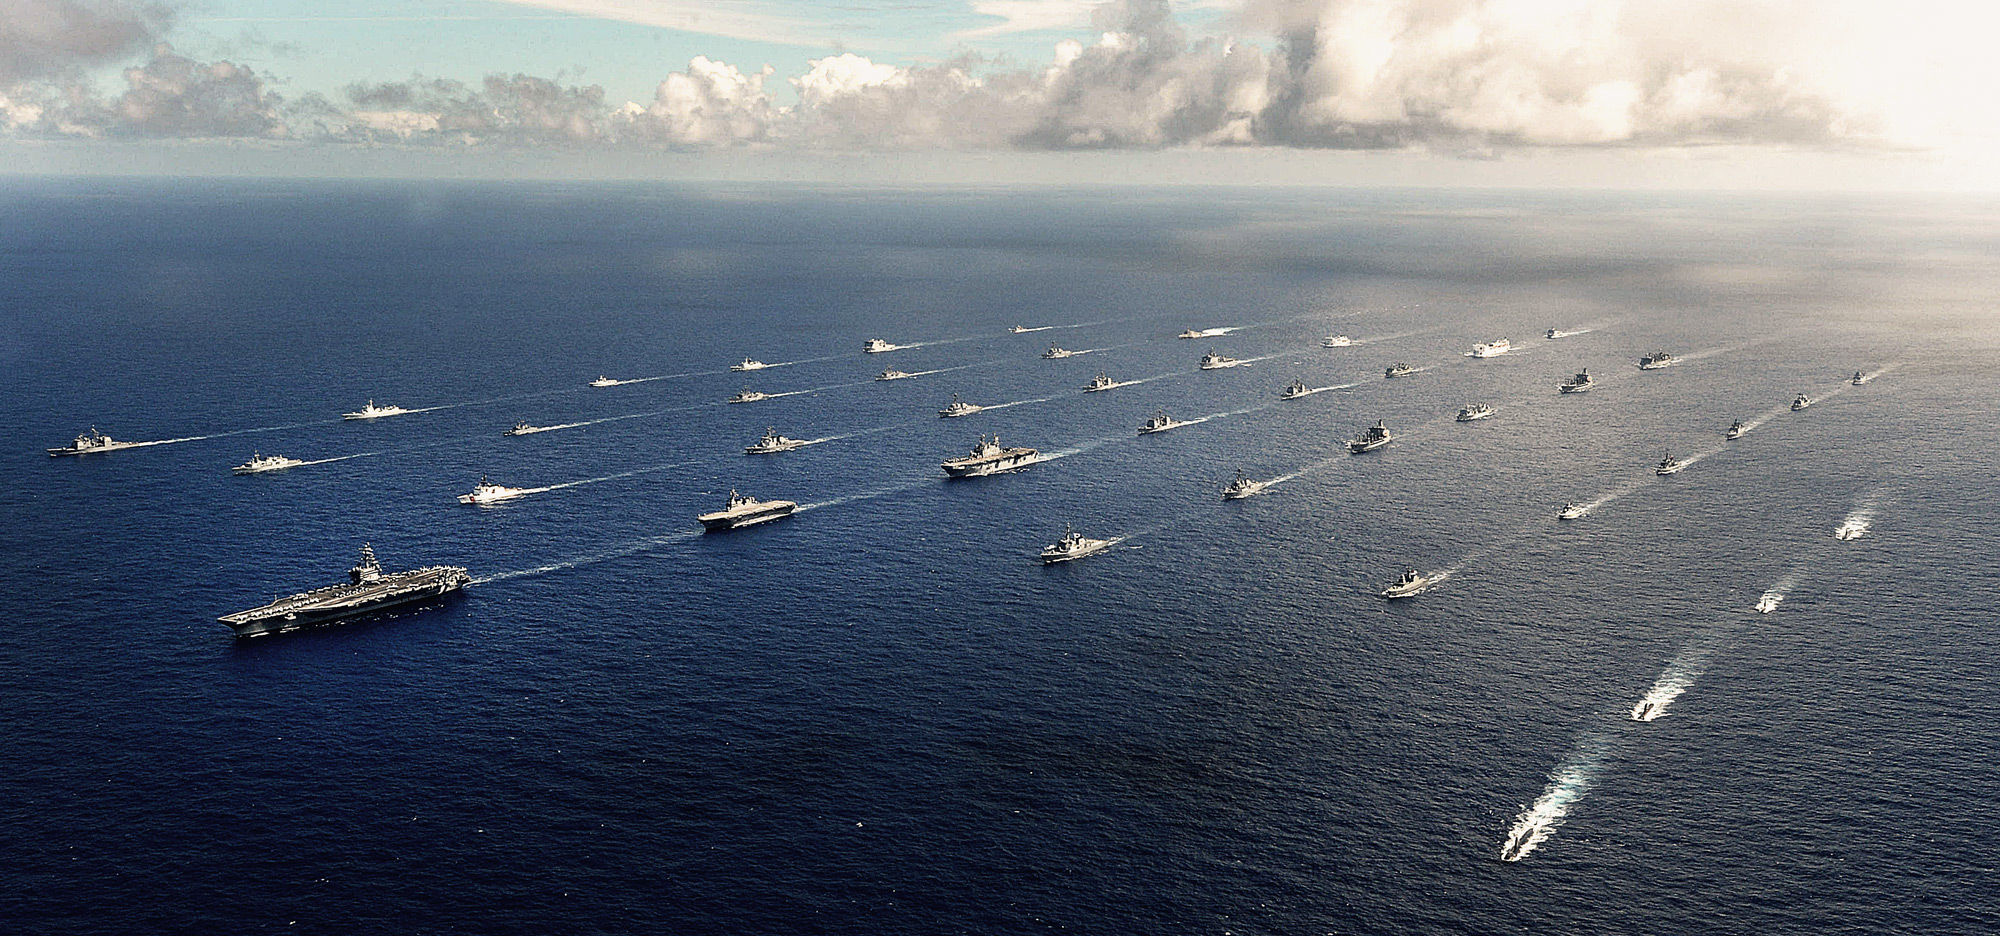 Averting crisis: American Strategy, Military Spending ans Collective Defence in the Indo-Pacific